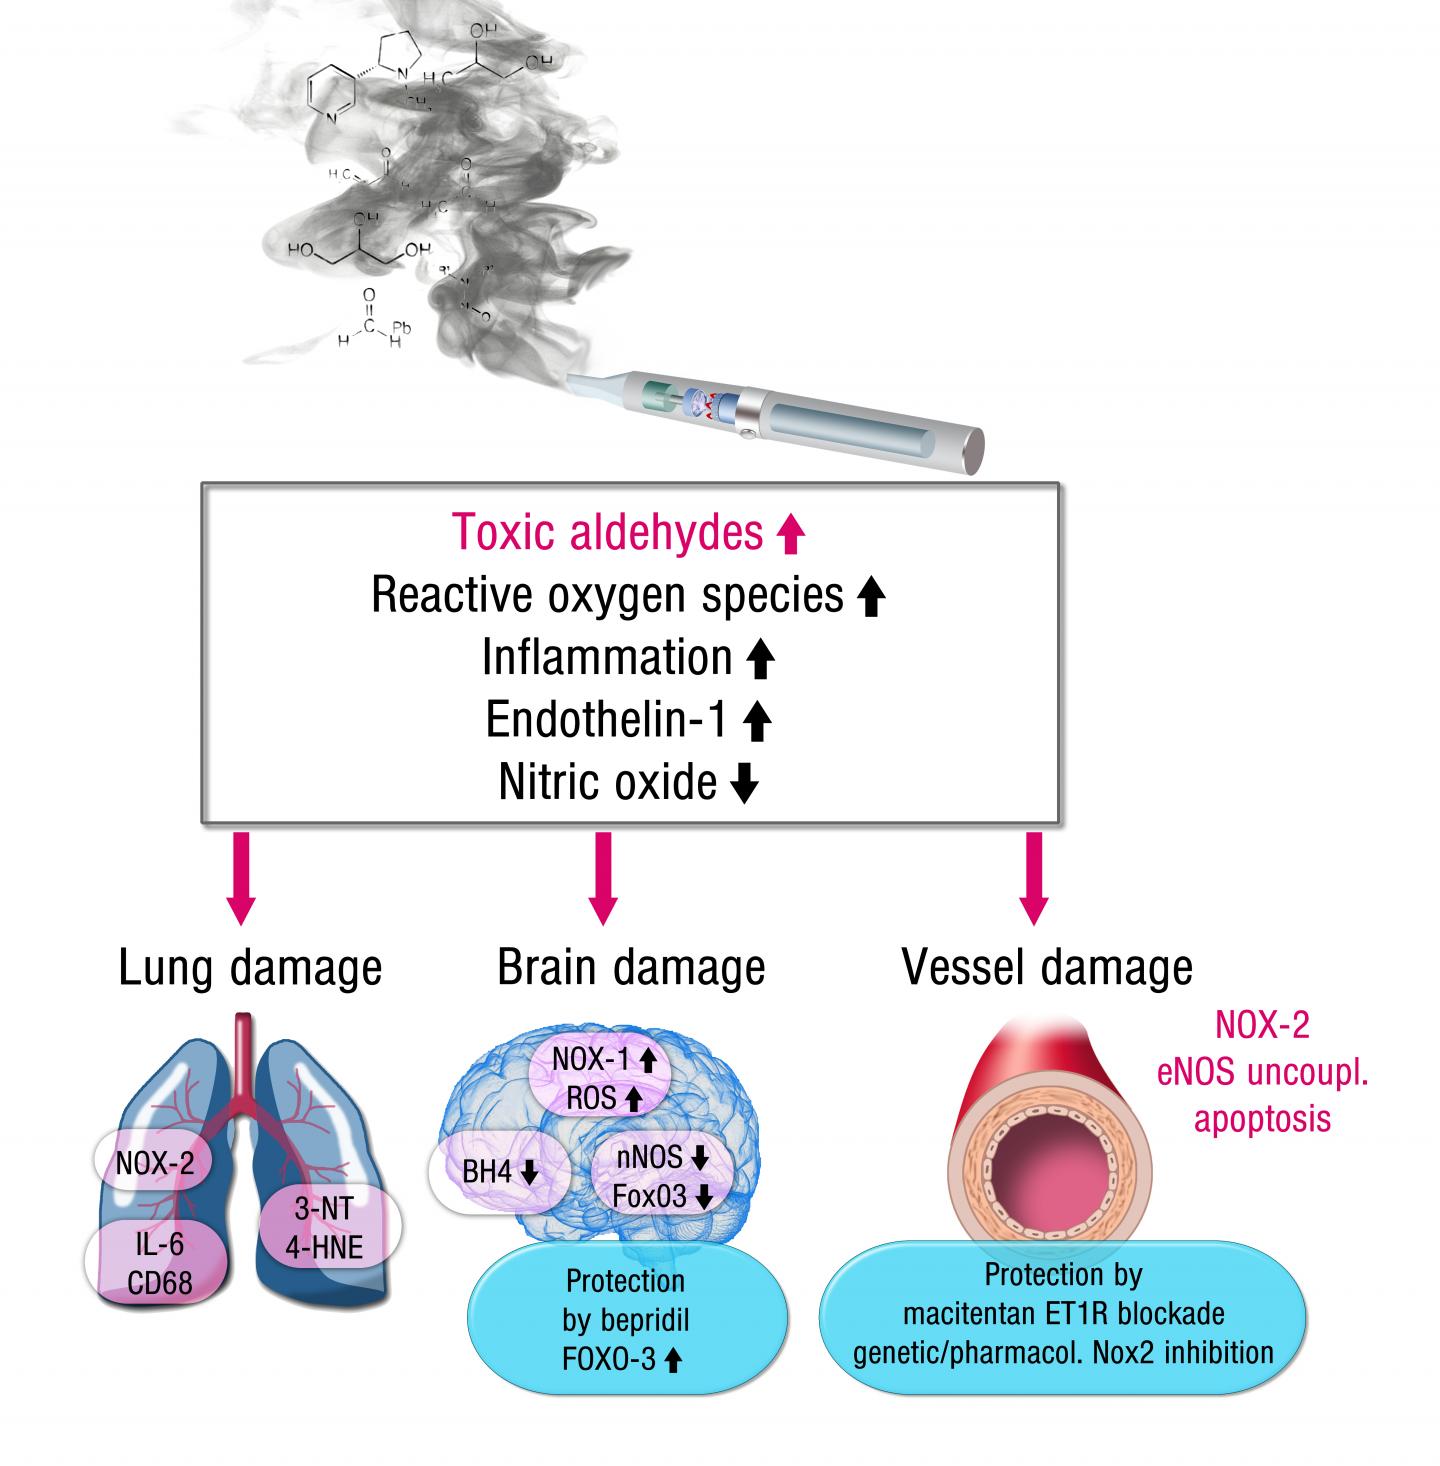 How E-Cigarettes Damage the Brain, Blood Vessels and Lungs